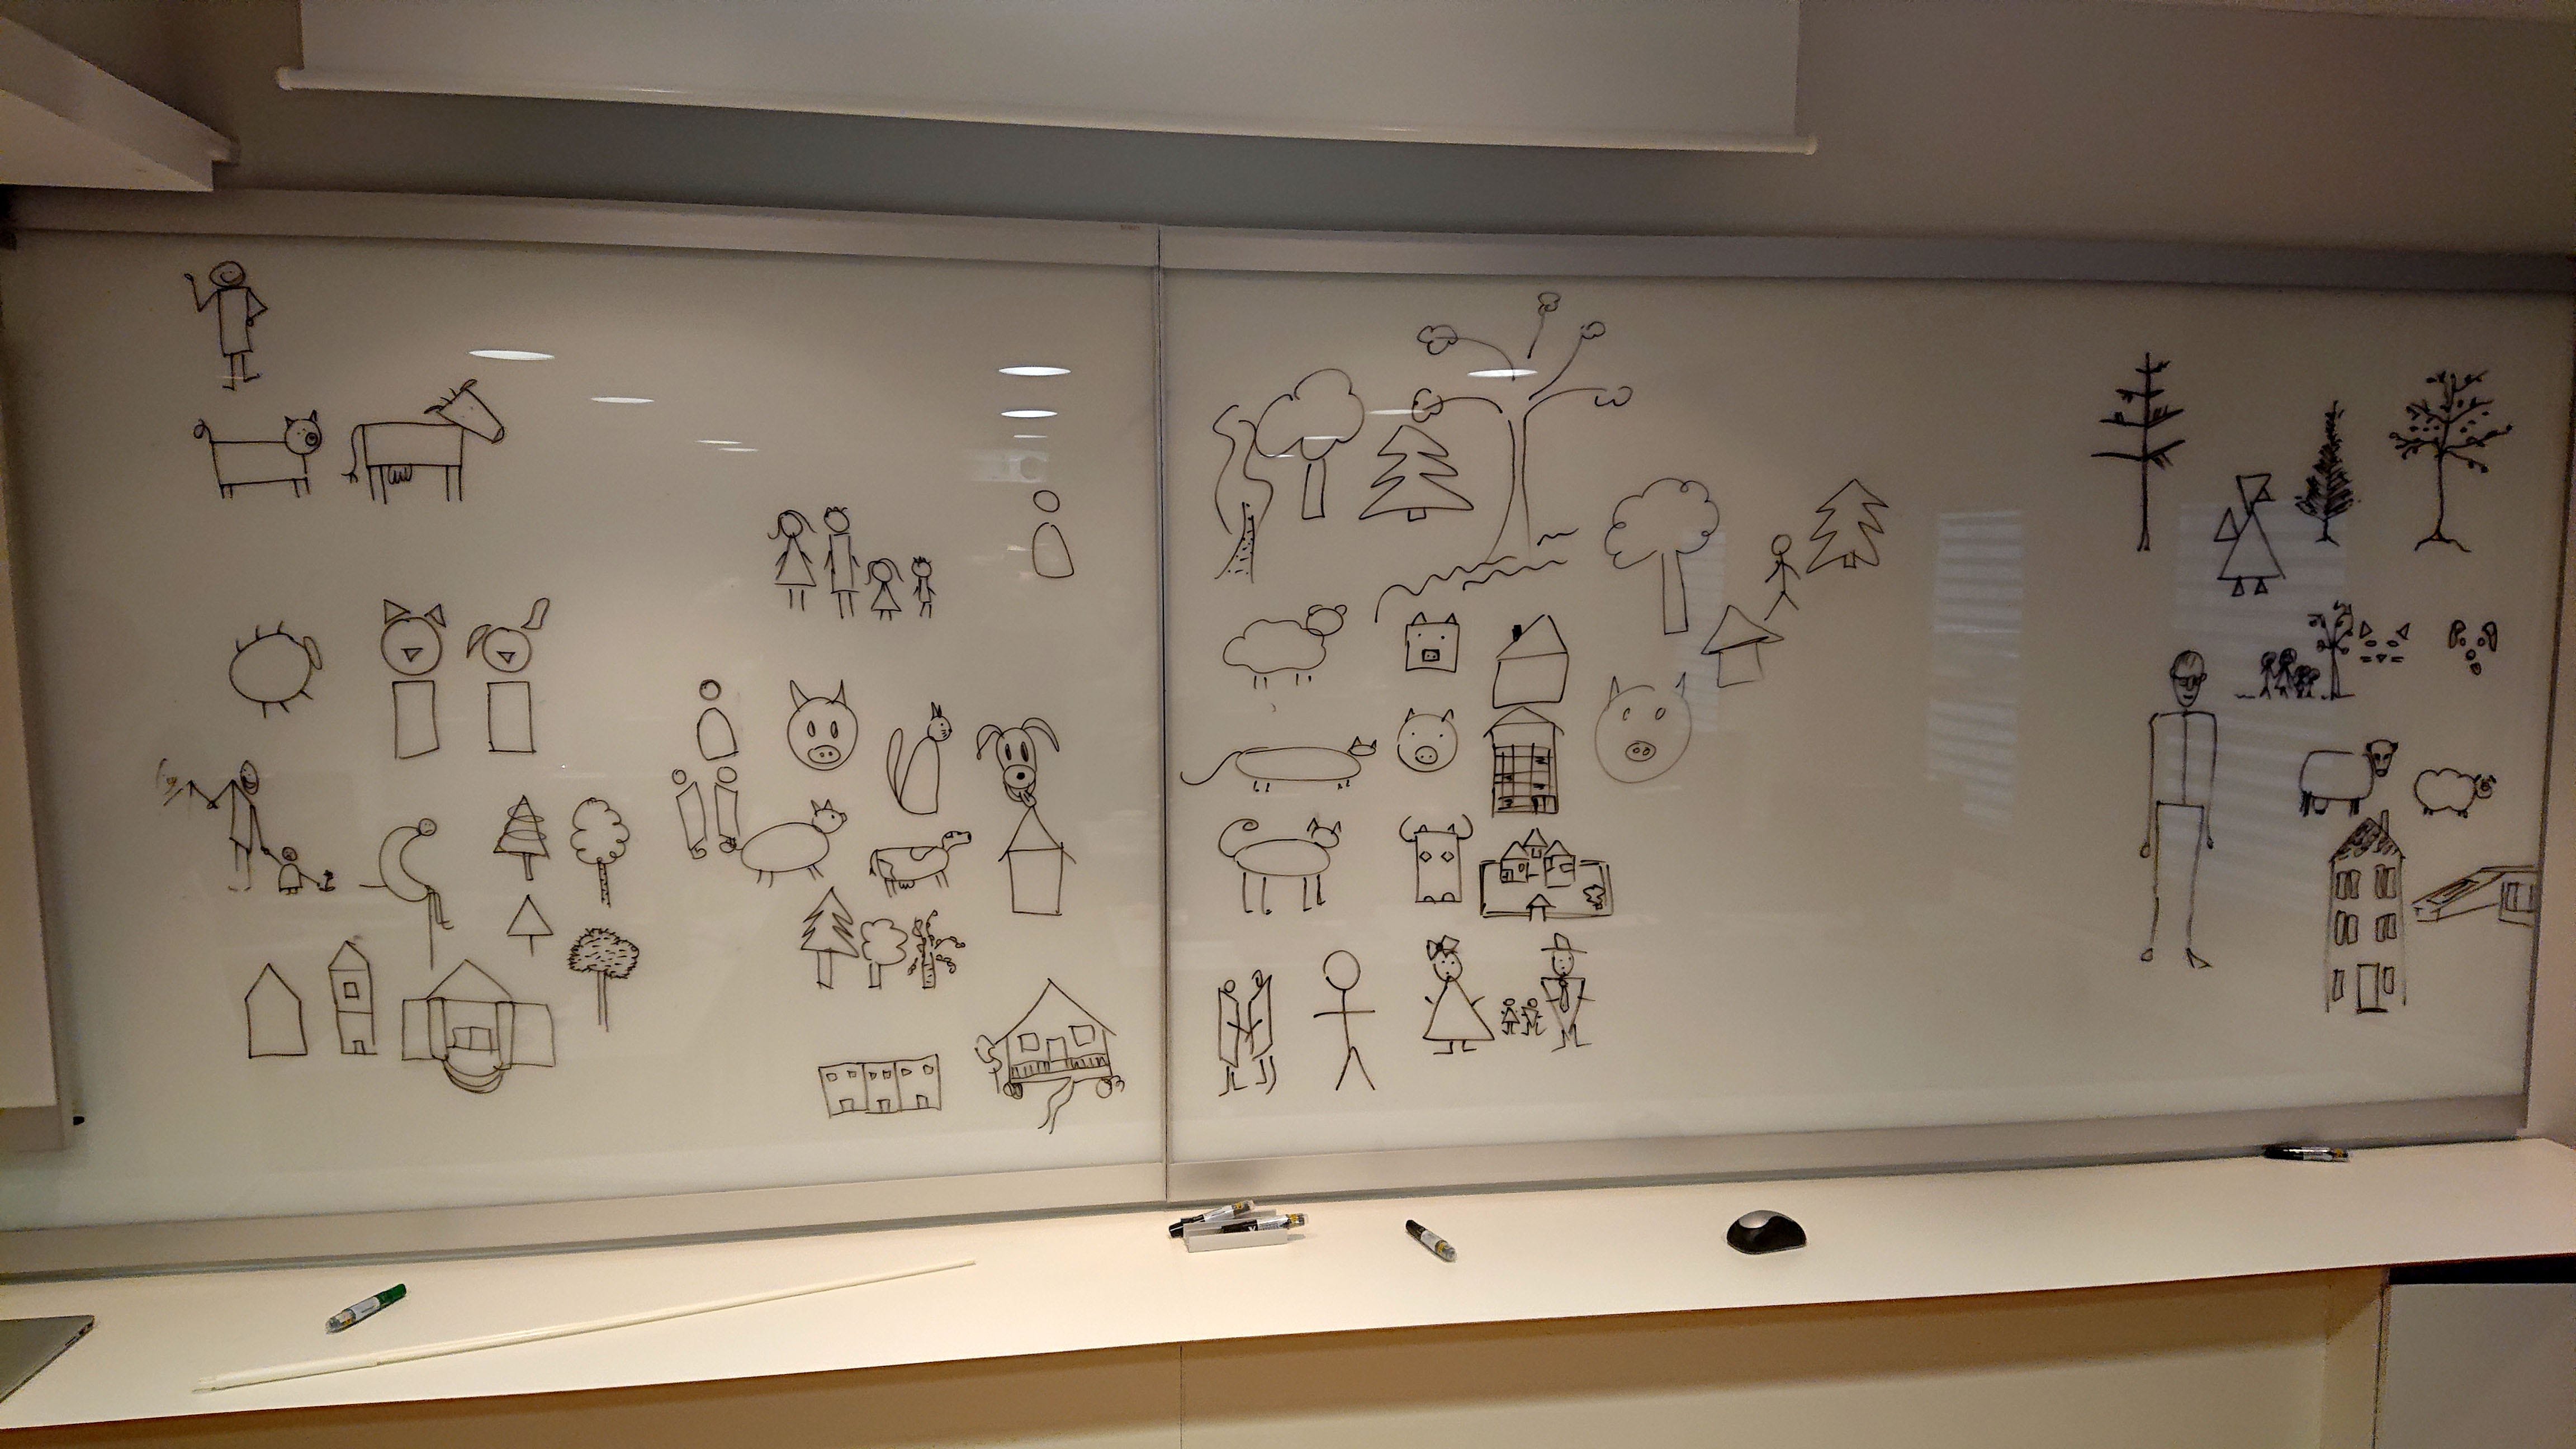 Examples of drawings on wall from a workshop